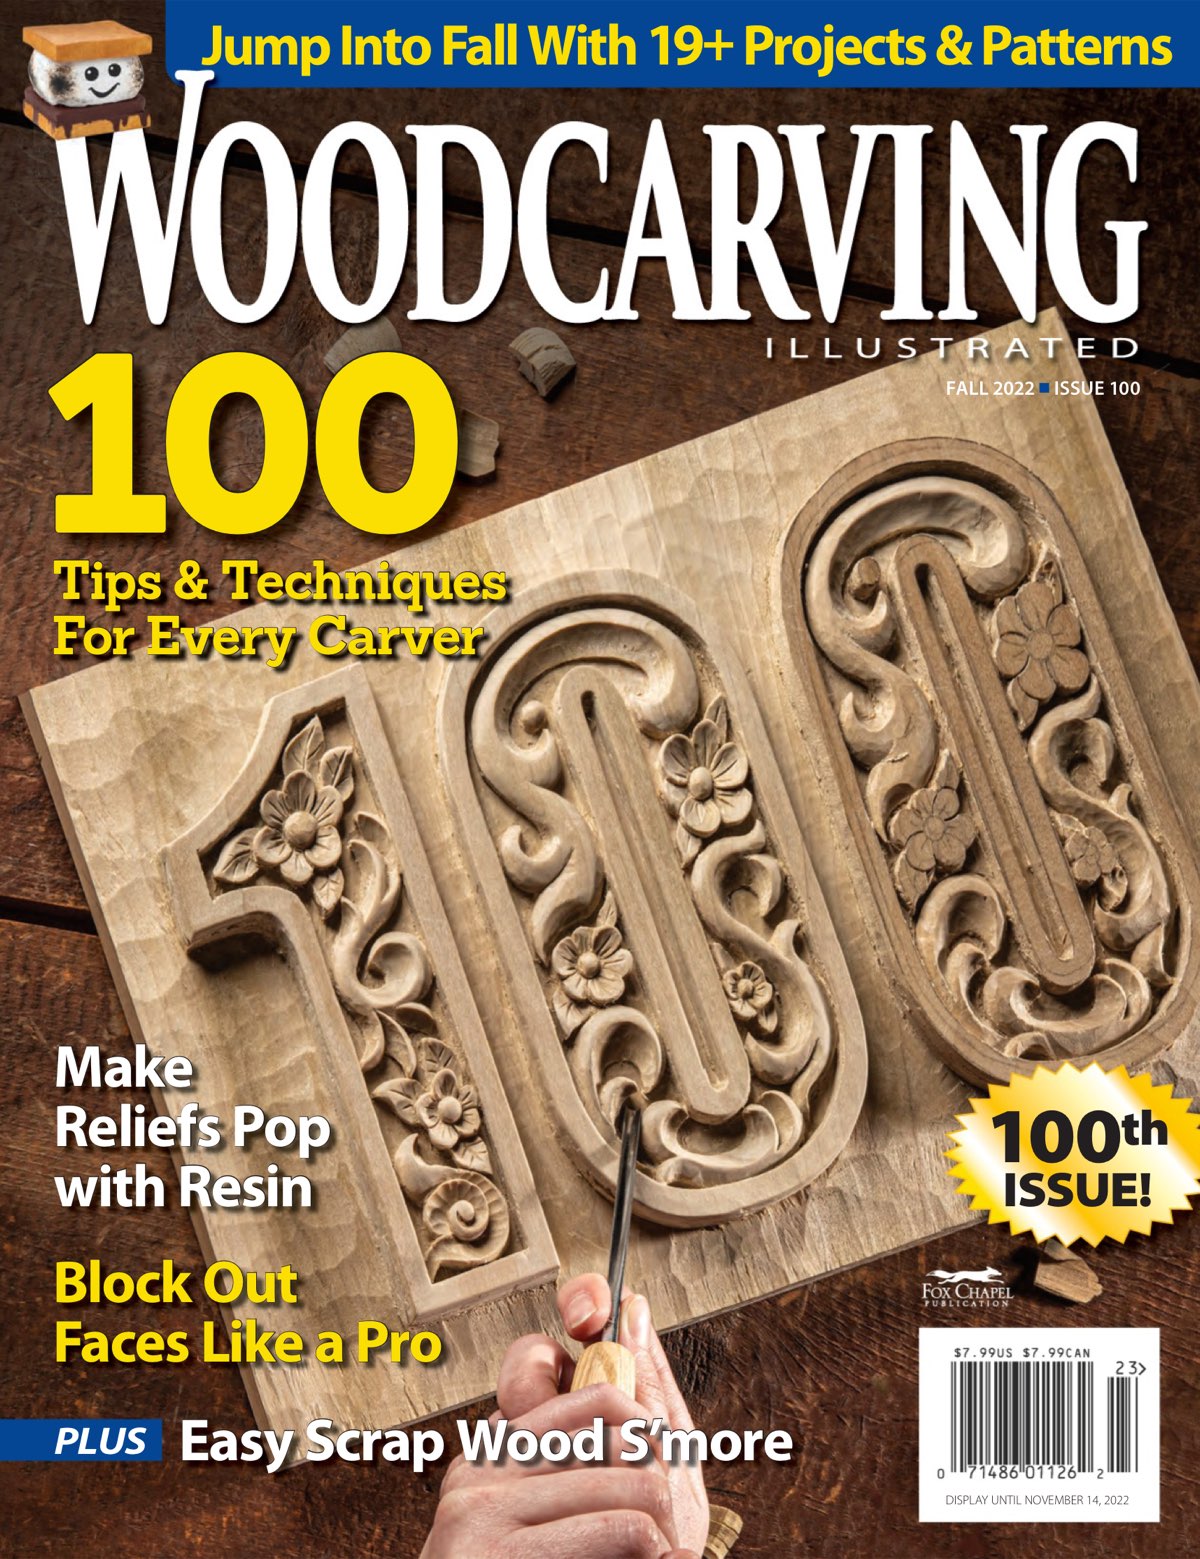 Woodcarving Illustrated - Issue 100 [Fall 2022]